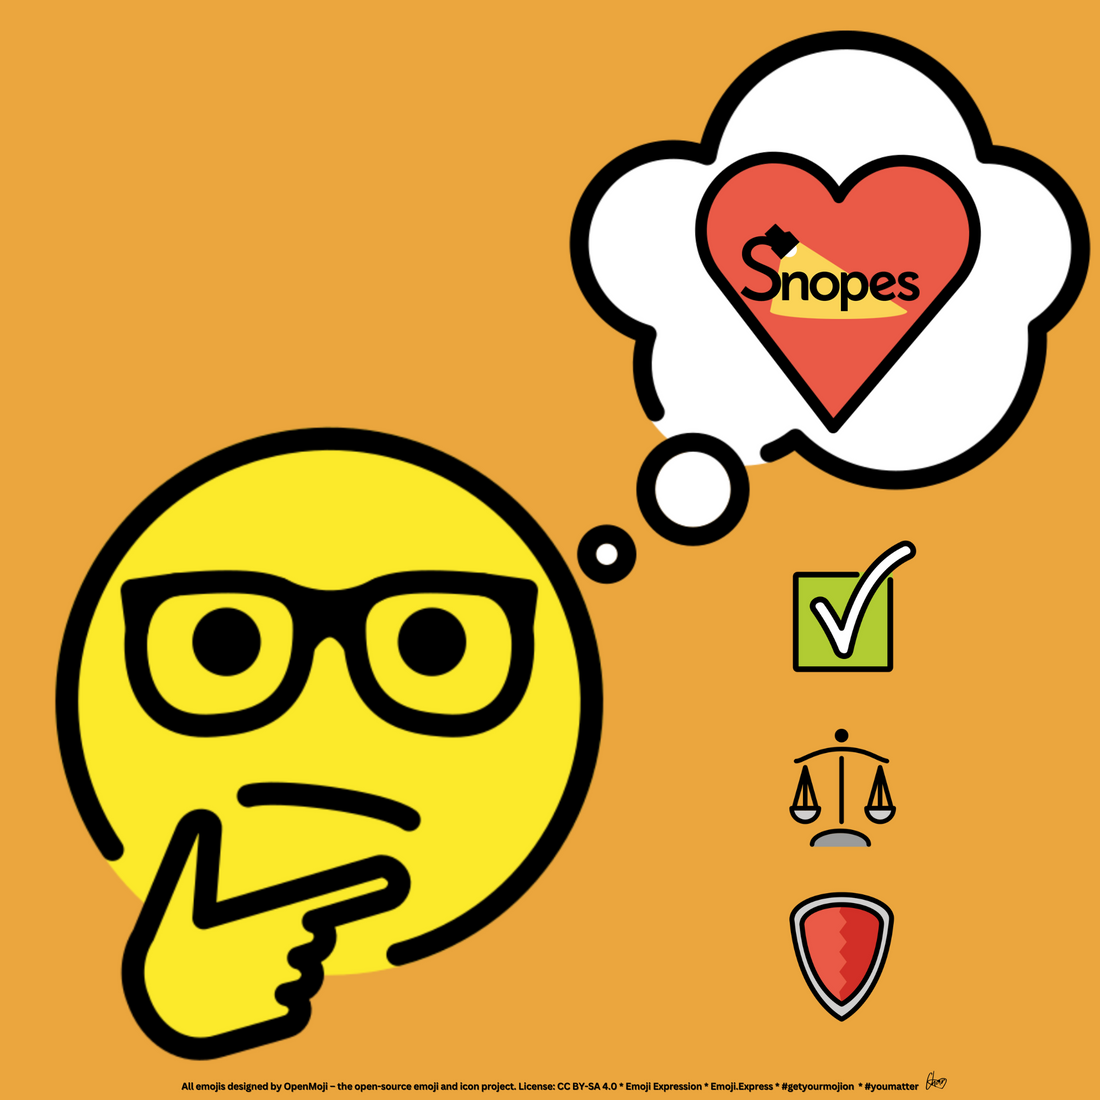 Snopes - Debunking Myths Since Dial-Up Days (Moji Musings)